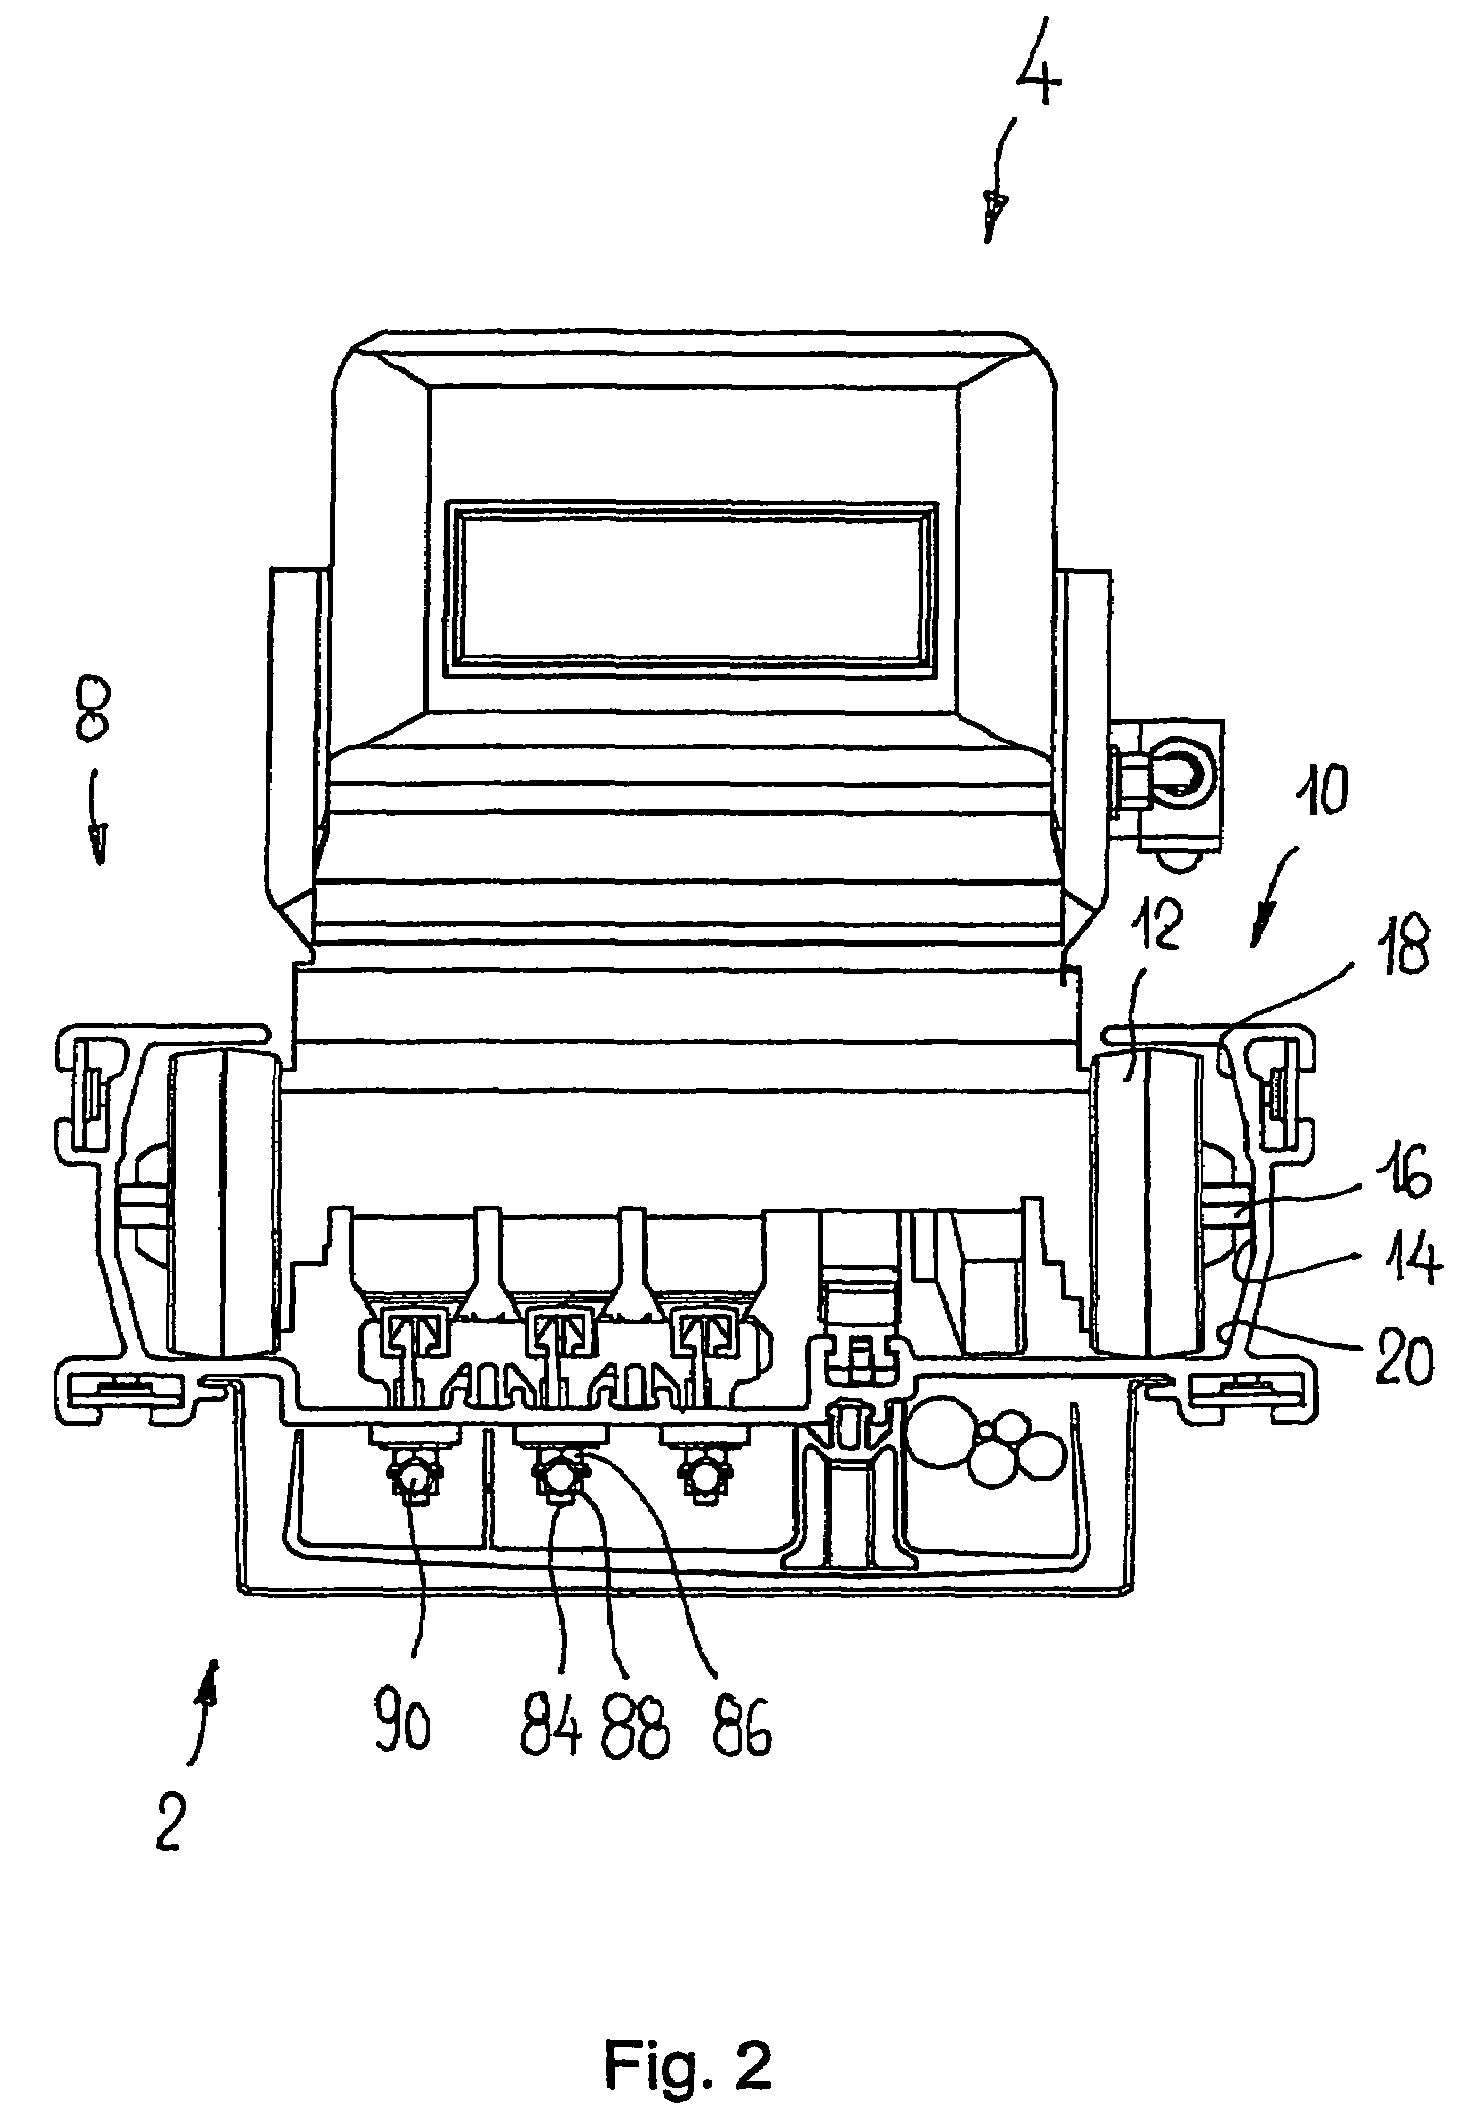 Rail for self-propelled electric trucks